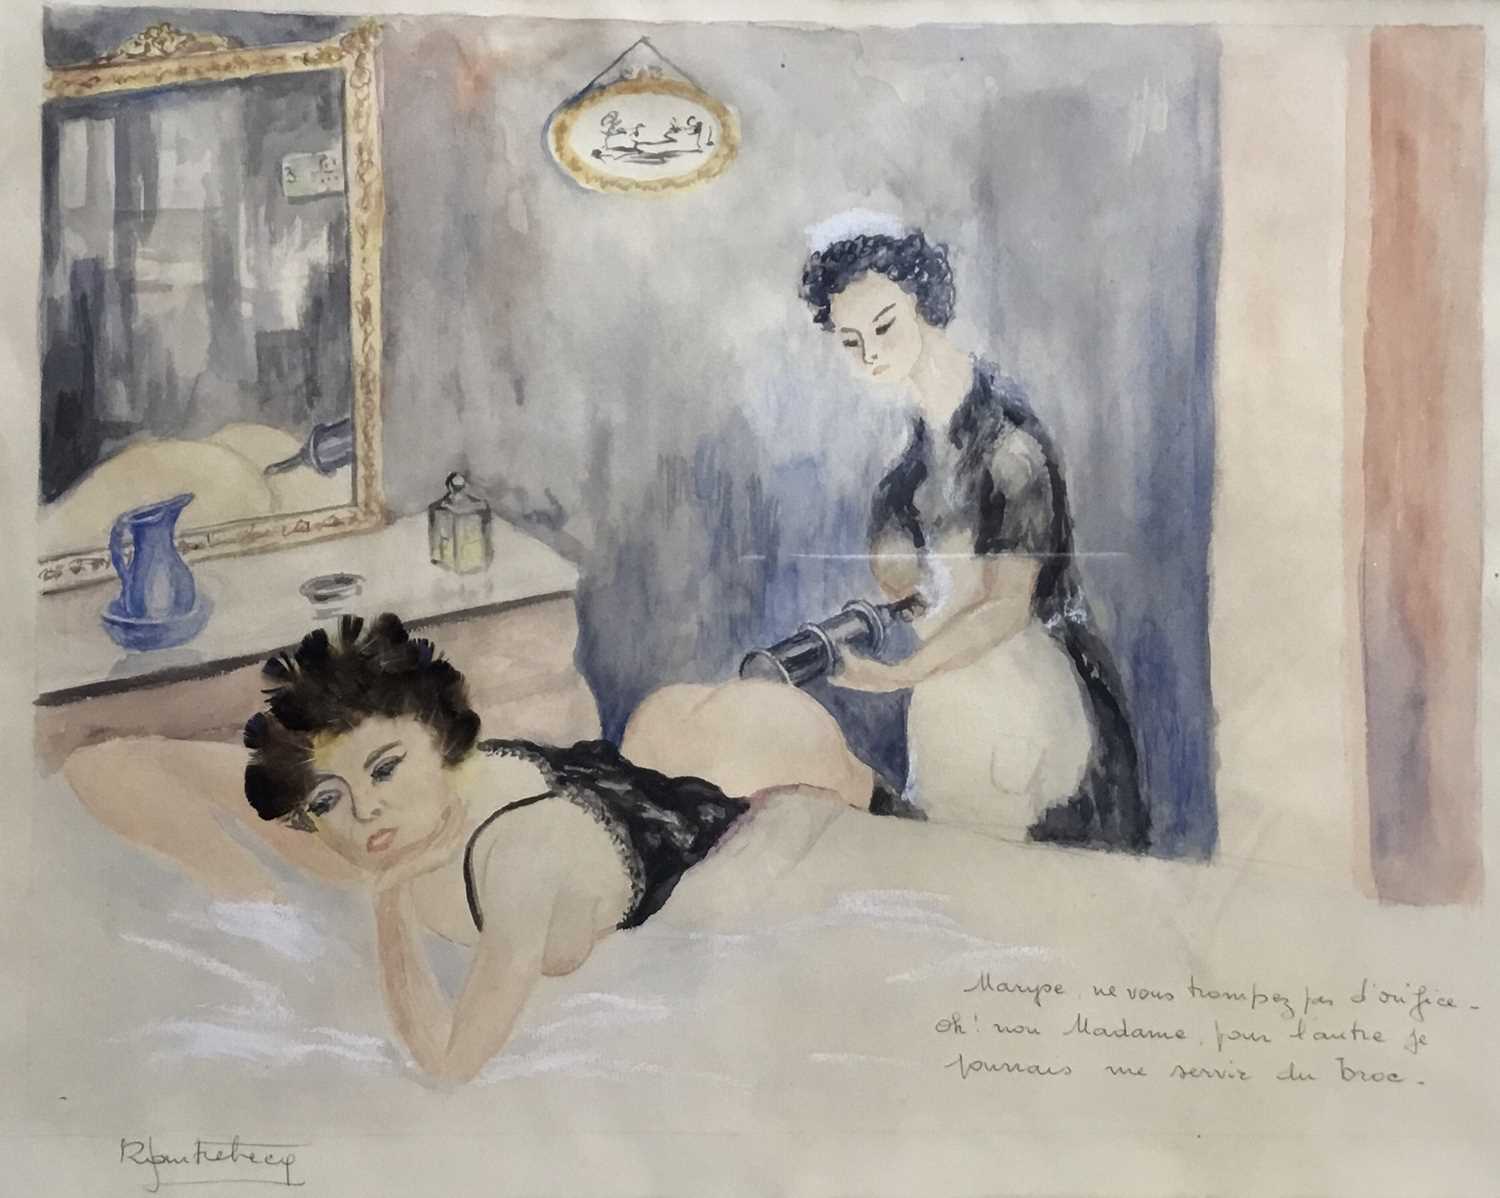 Lot 46 - Mid 20th century French School watercolour - a maid and mistress with an enema, indistinctly signed and inscribed, in glazed frame